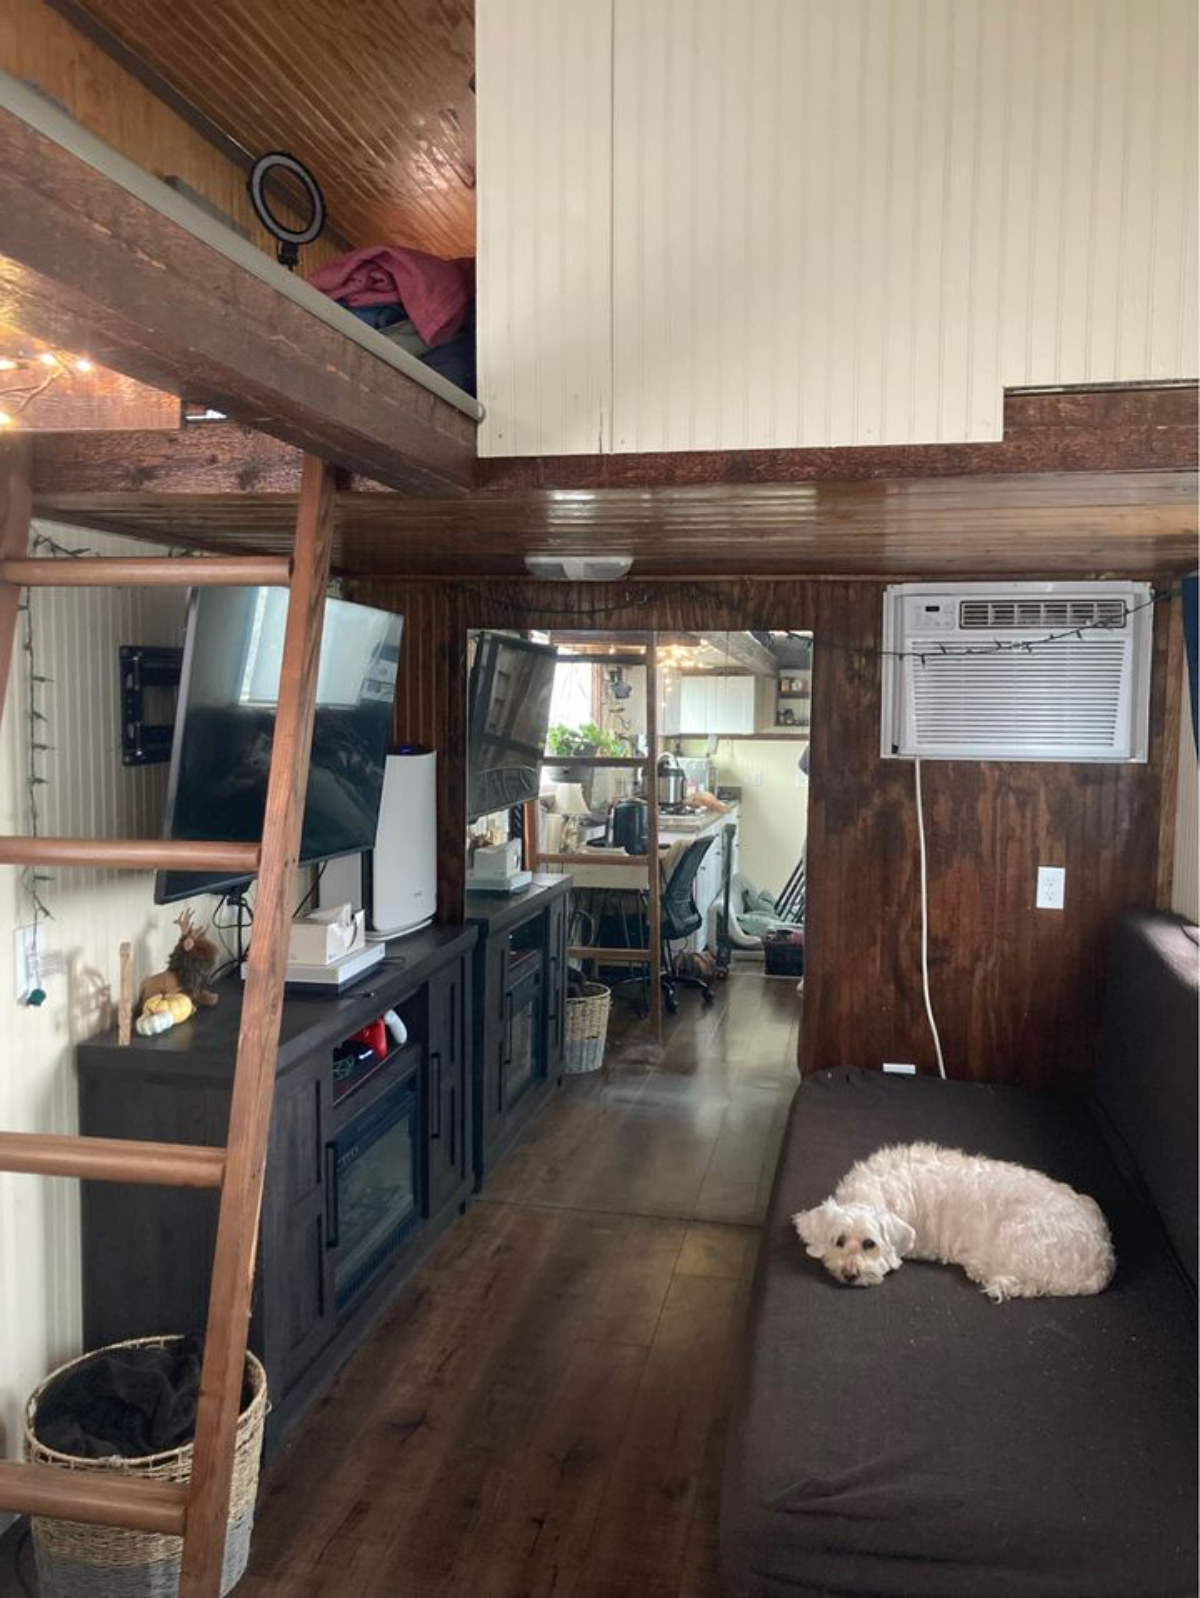 Living space of 30' Budget-Friendly Tiny House has a couch, television unit, storage cabinets and an air condition unit